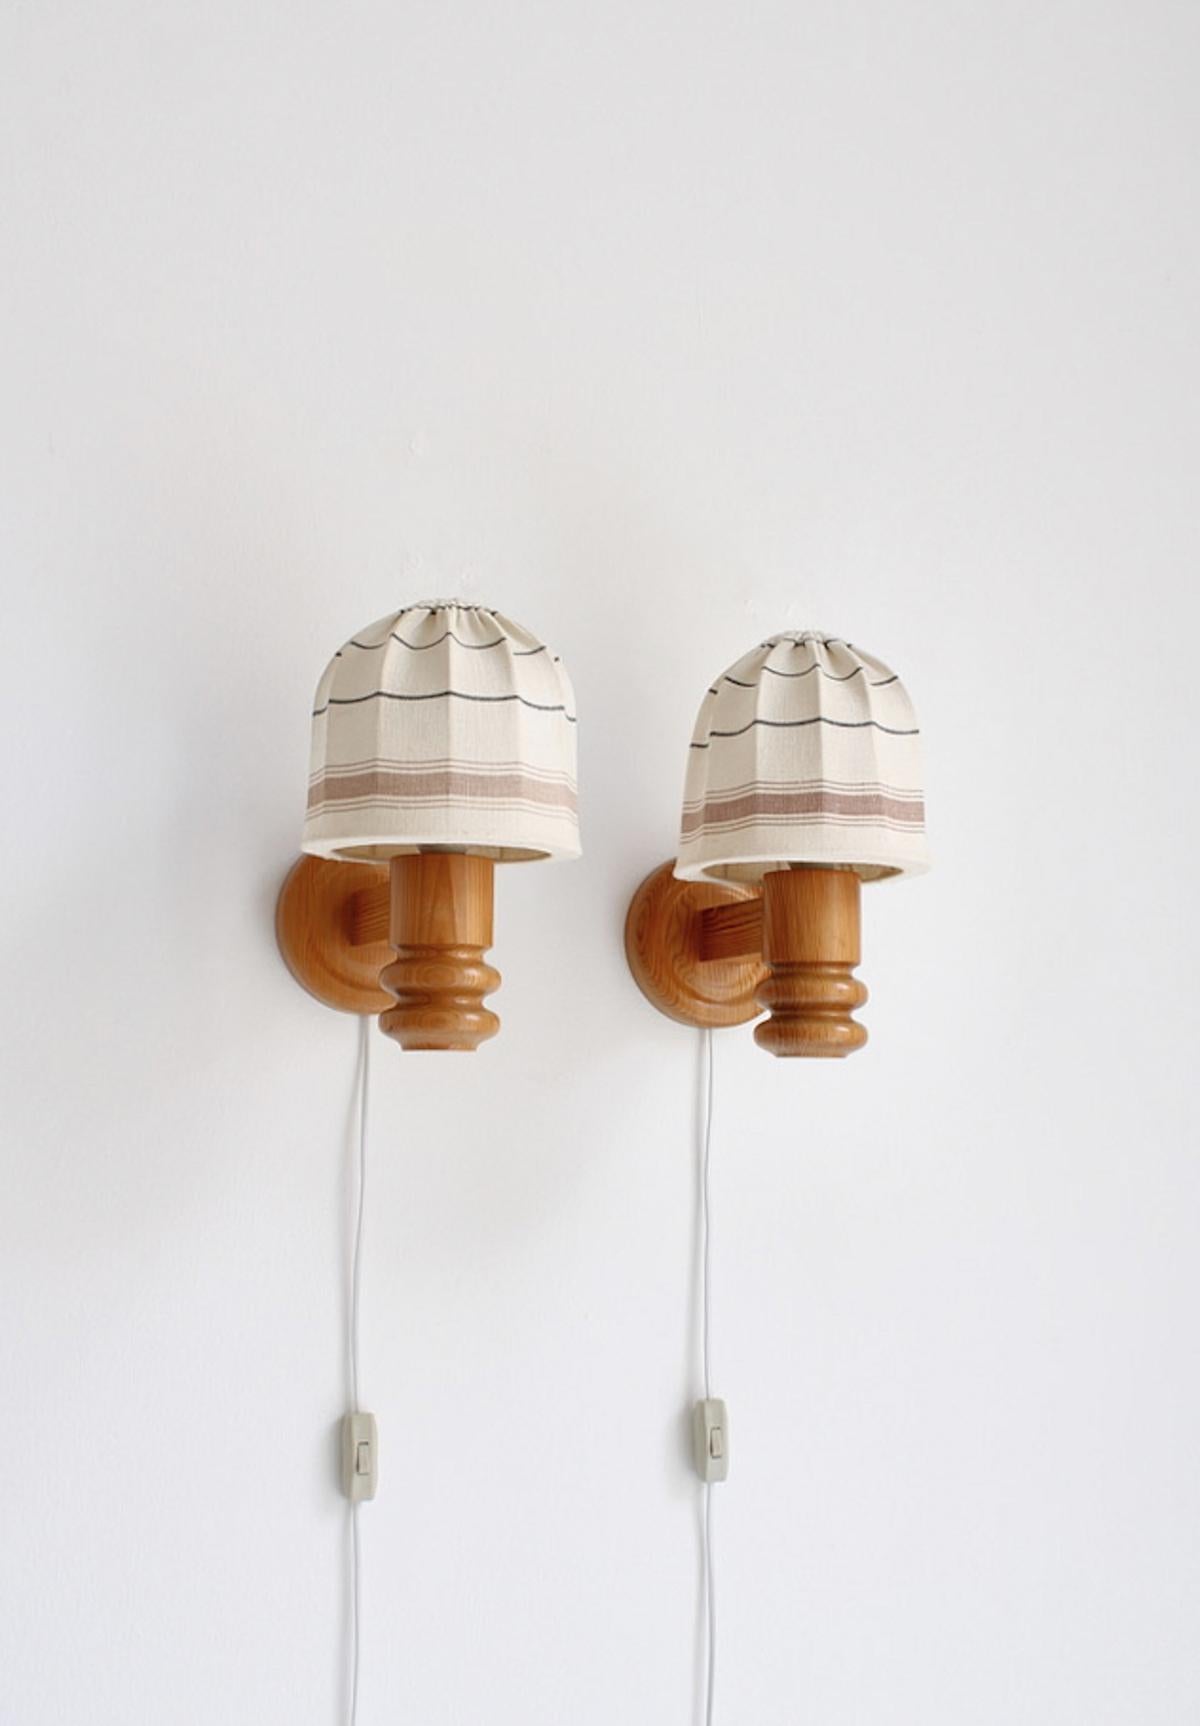 Late 20th Century Wall Lamps in Pine and Textile Shades by Solbackens Svarveri, Sweden, 1970s